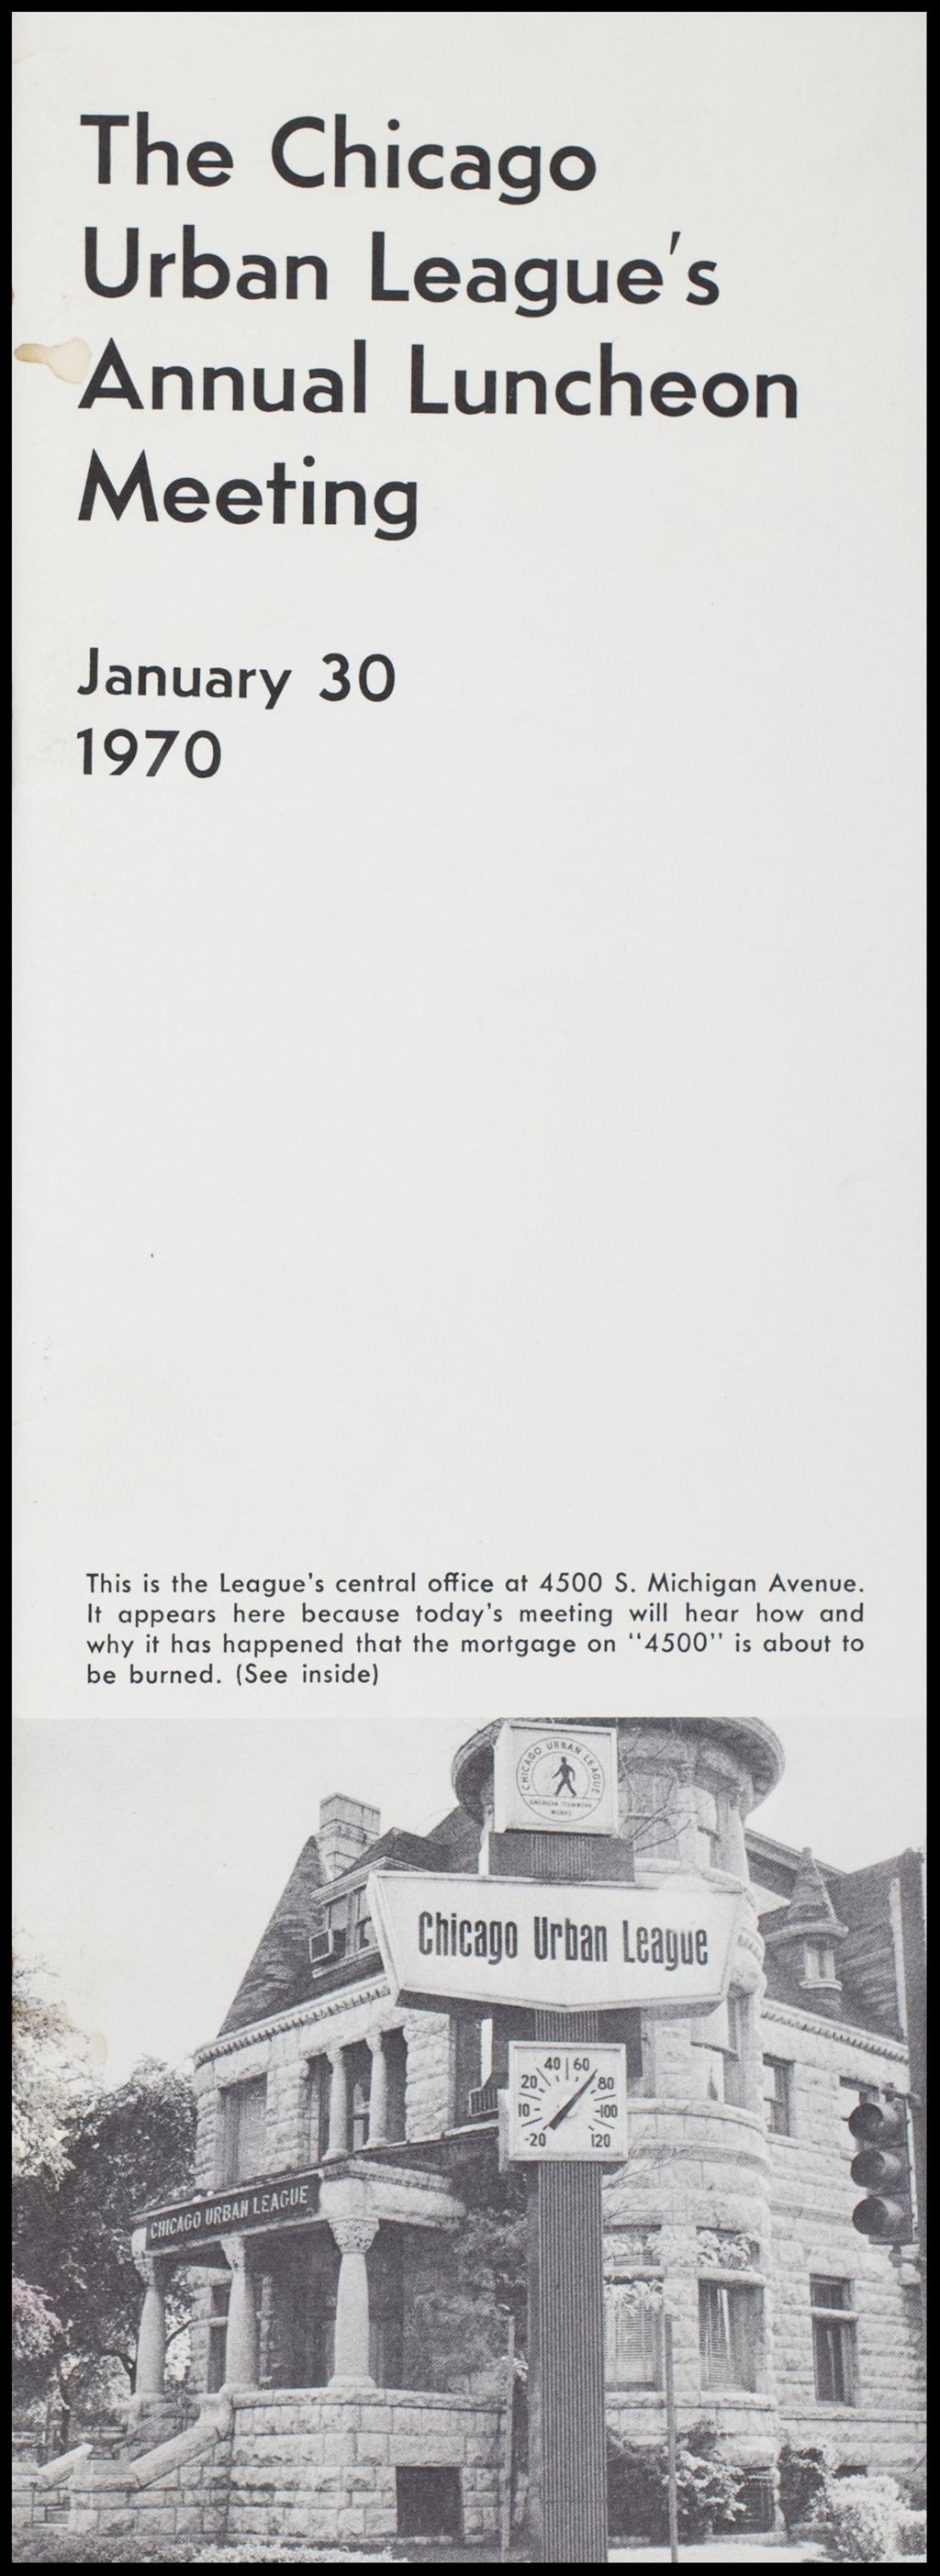 Miniature of Correspondence and reporting, 1969-1970 (Folder I-3017)